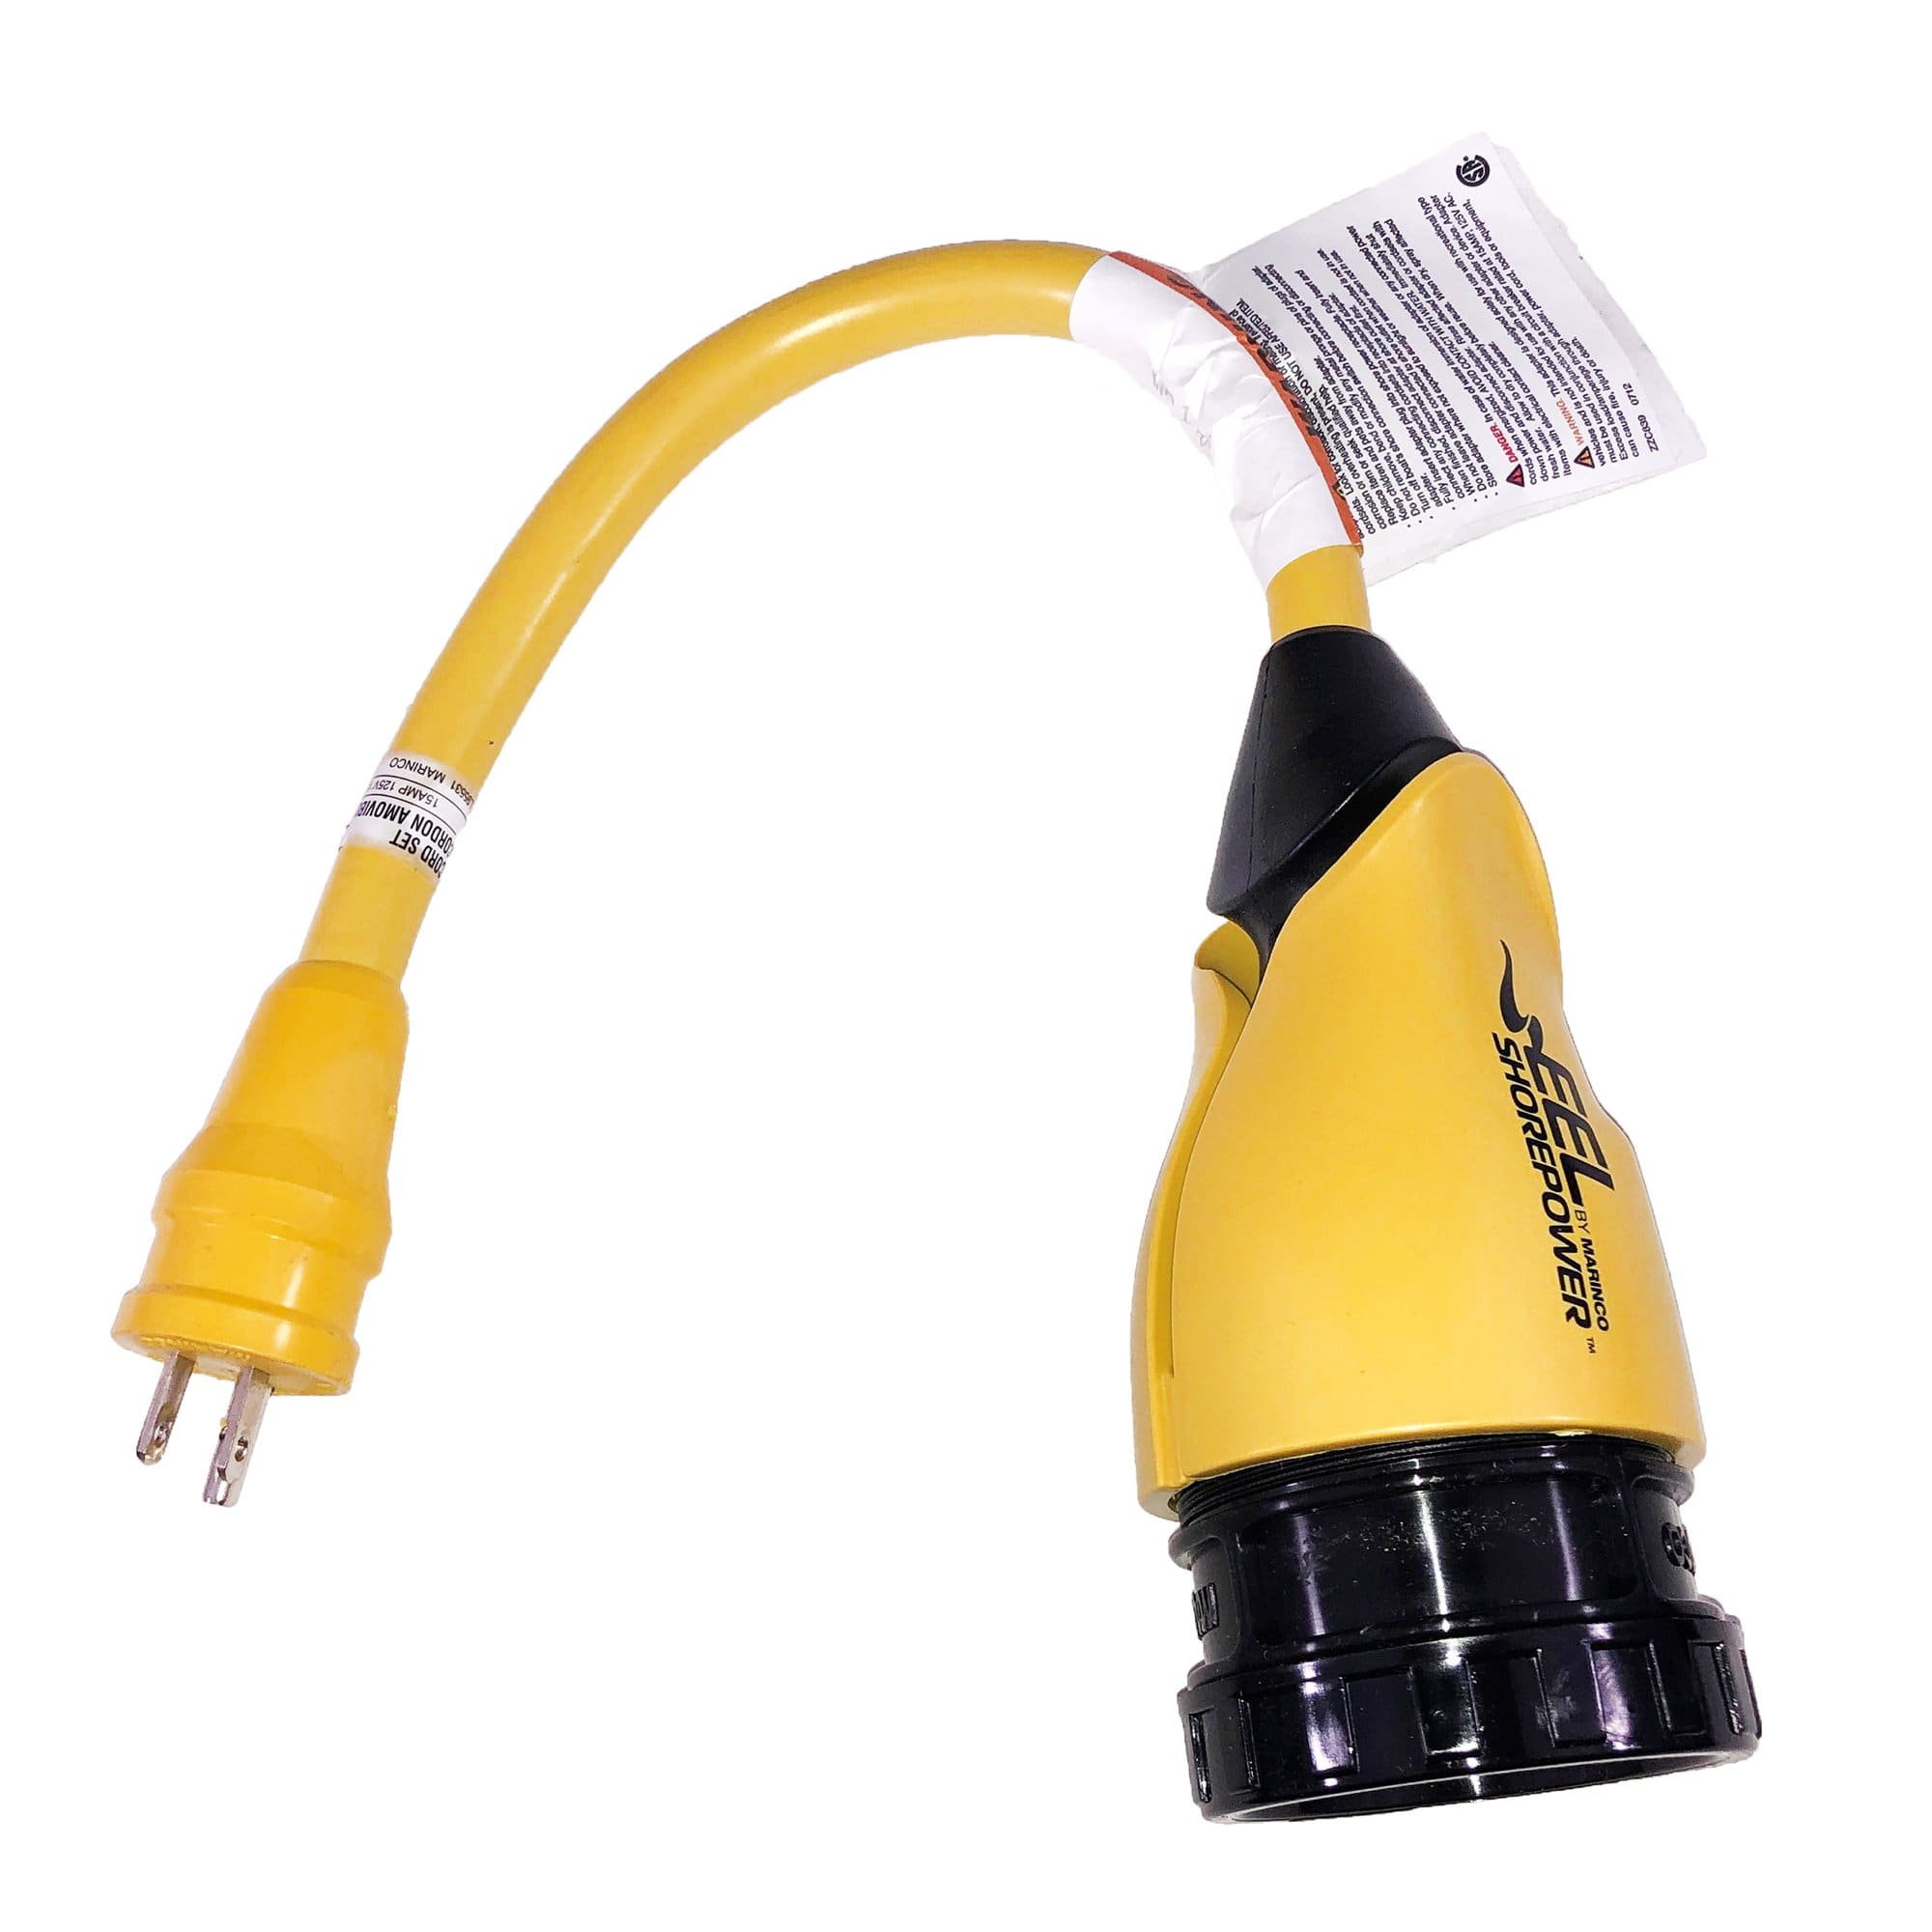 Marinco P15-30 EEL 30A-125V Female to 15A-125V Male Pigtail Adapter 25' - Yellow